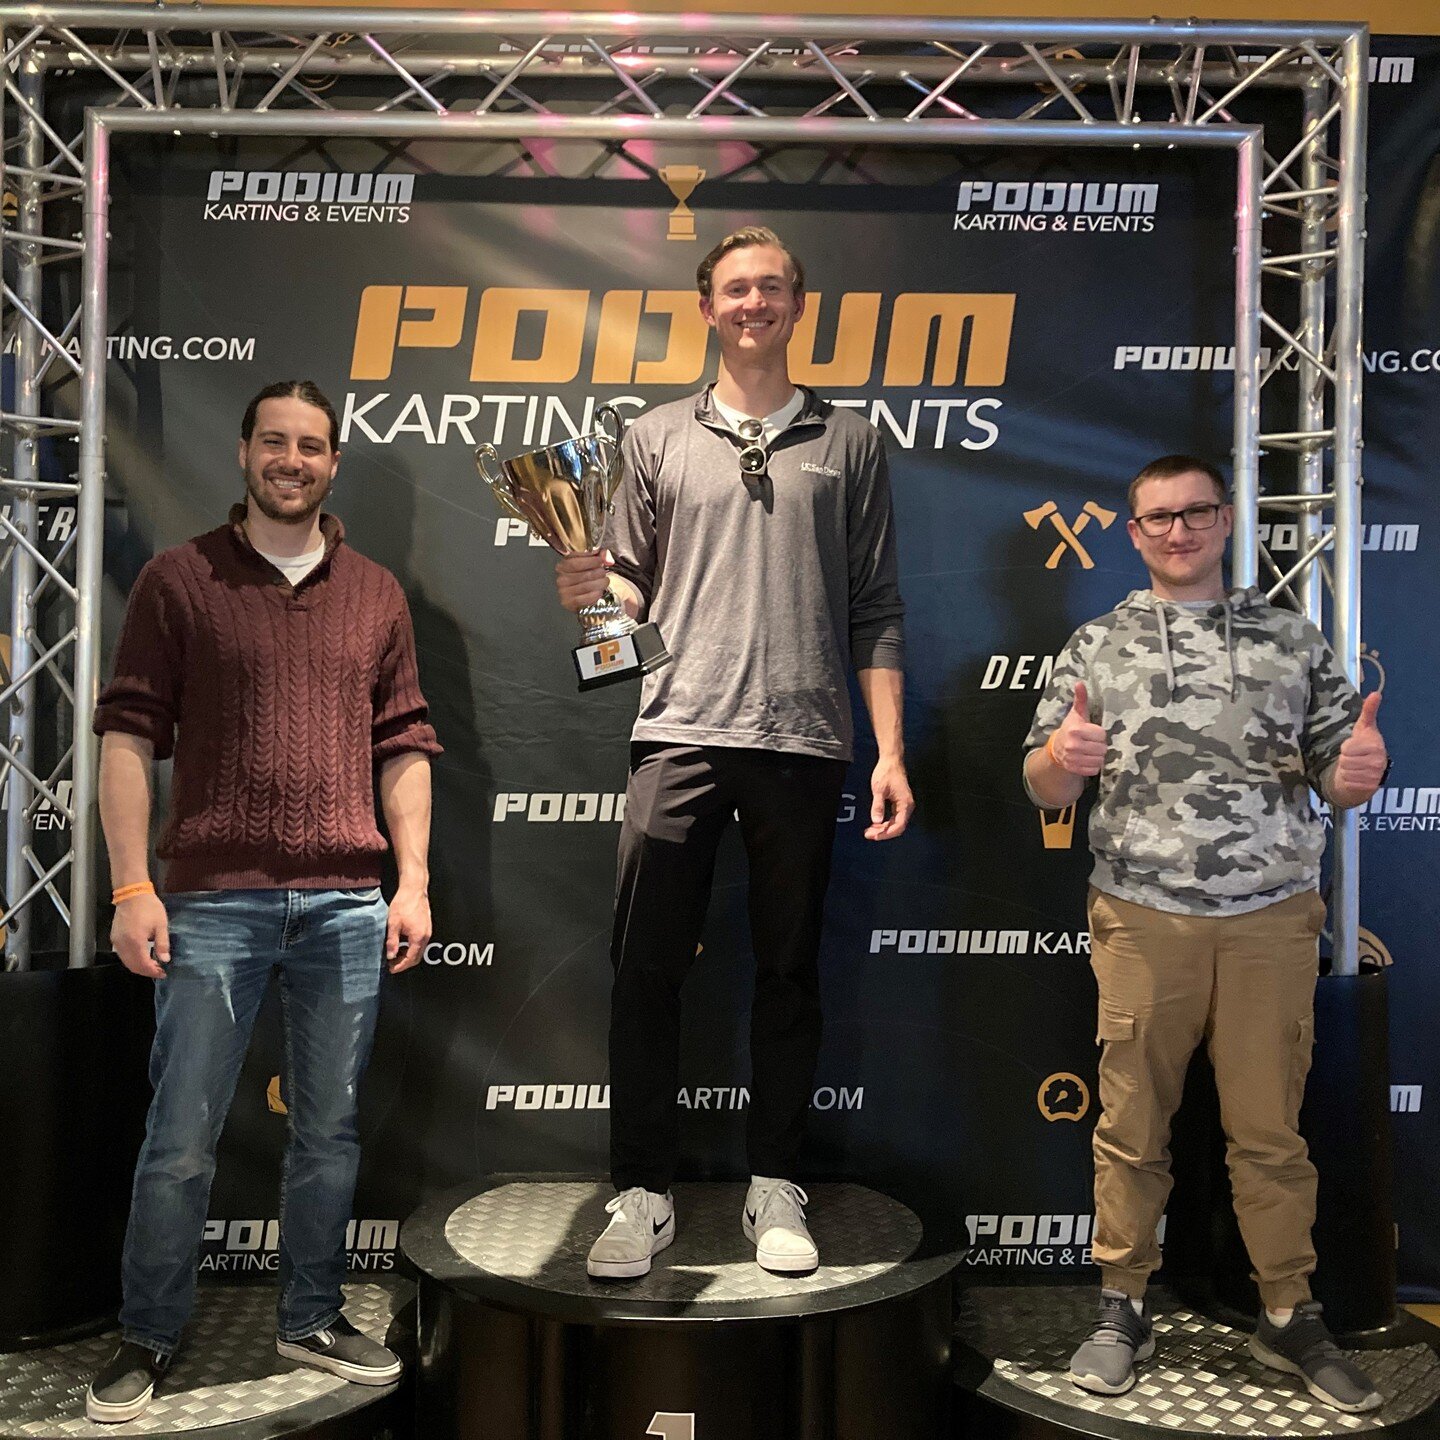 The winner's circle of the #MakseGroup Karting event at #PodiumKarting